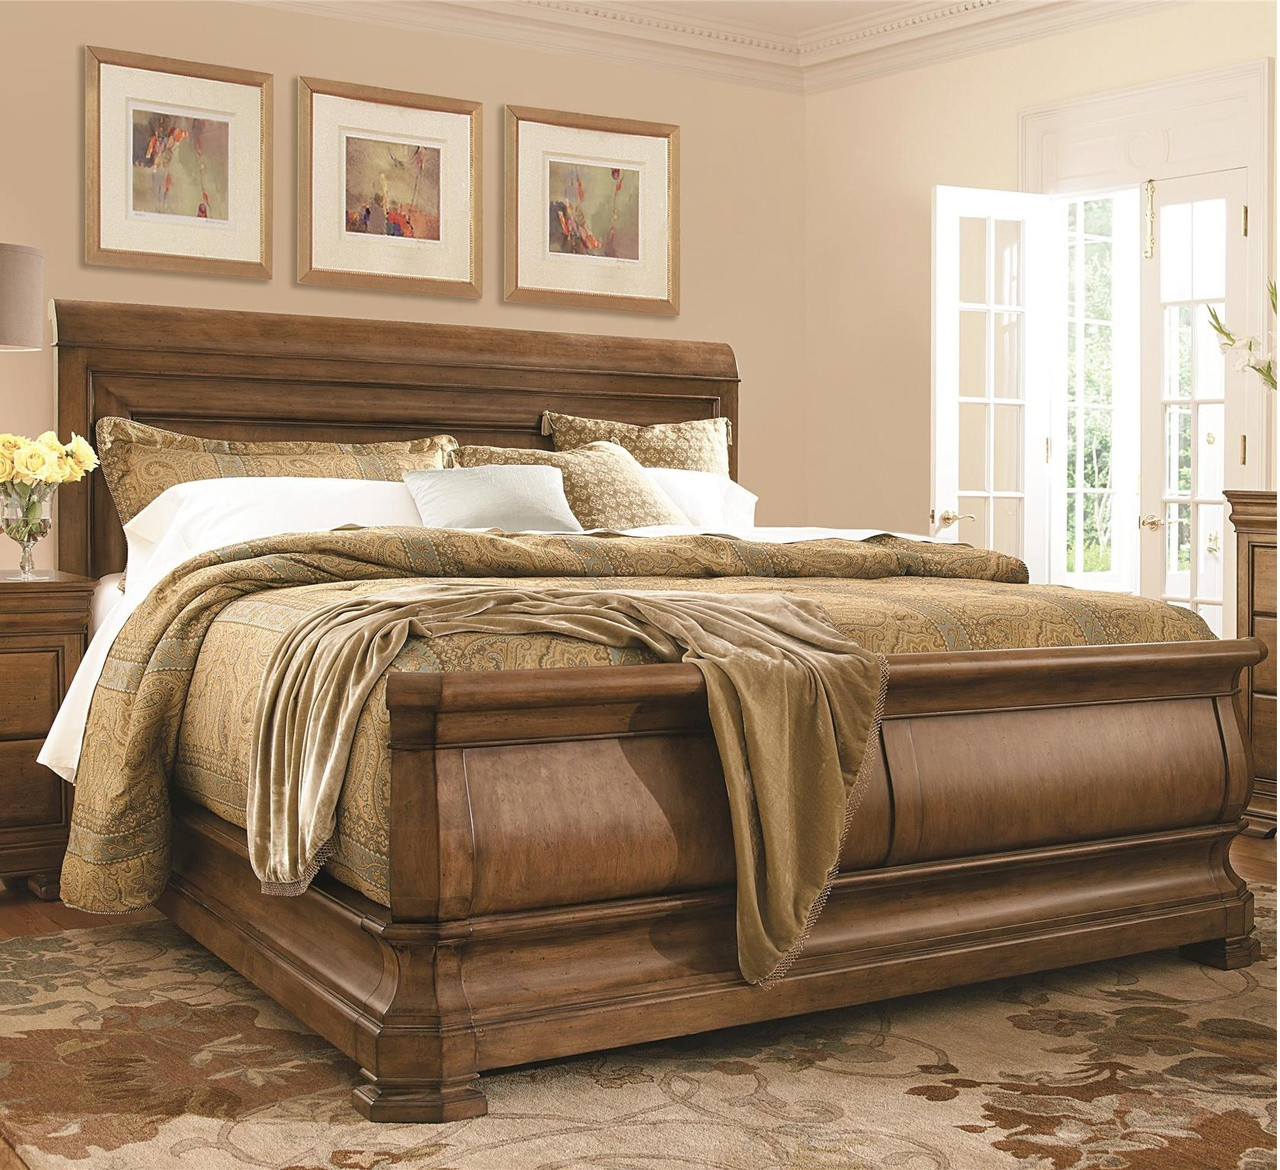 louis philippe king bed